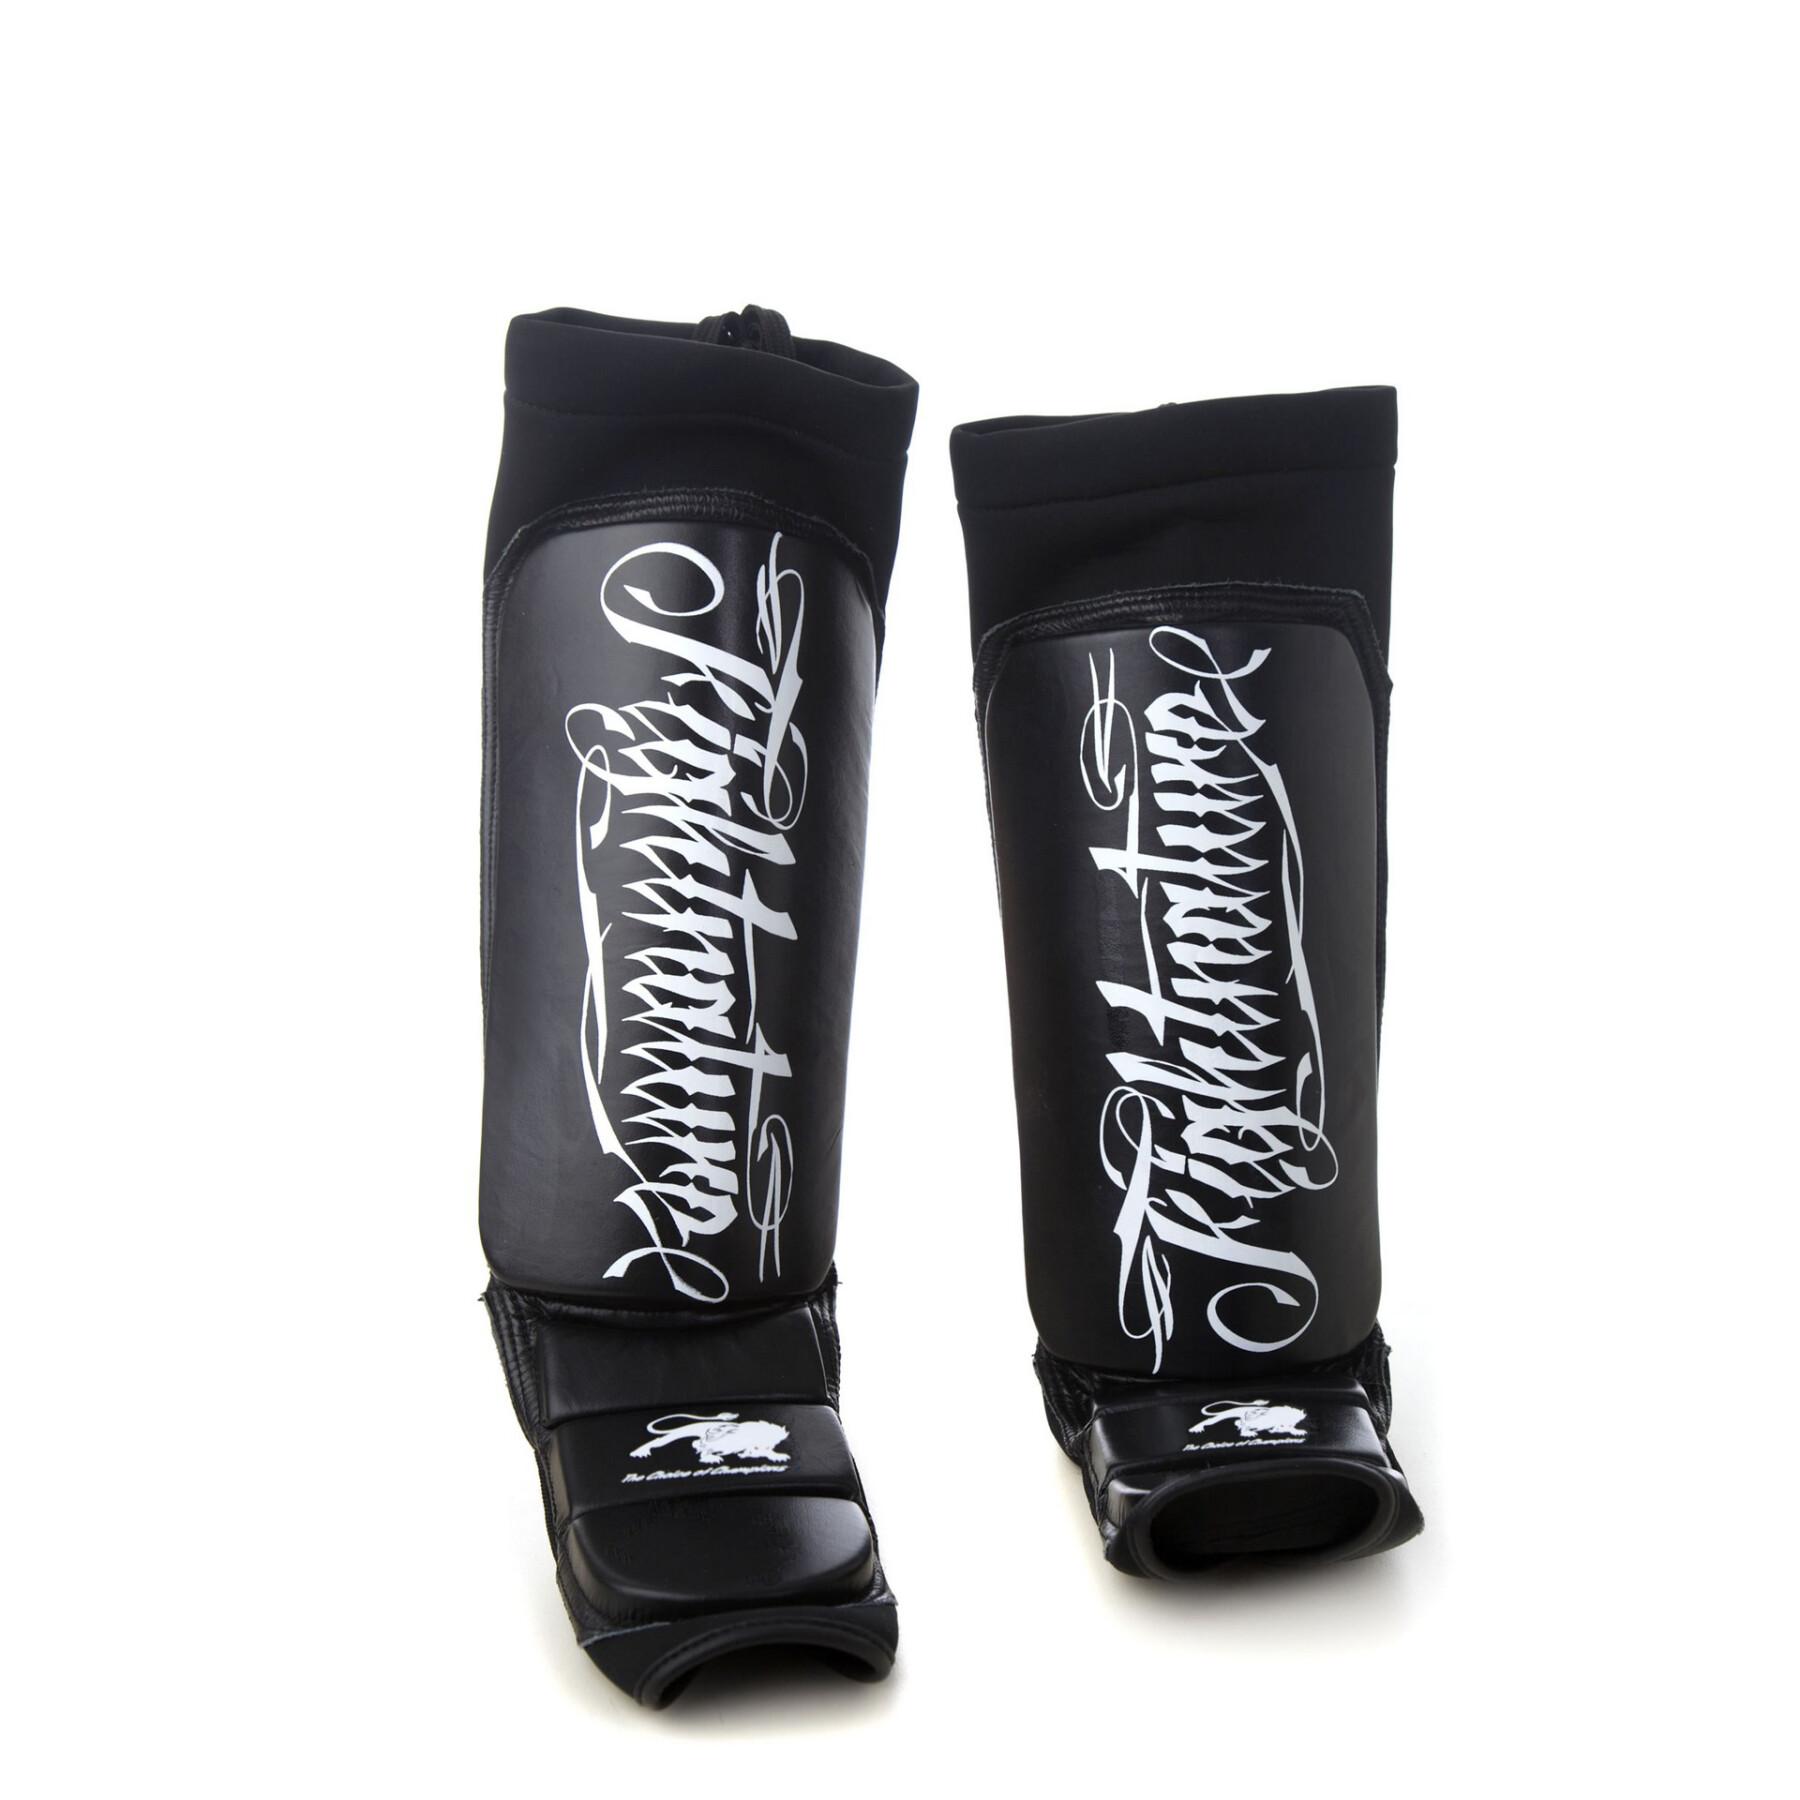 Leather shin and instep guards mma Fightnature